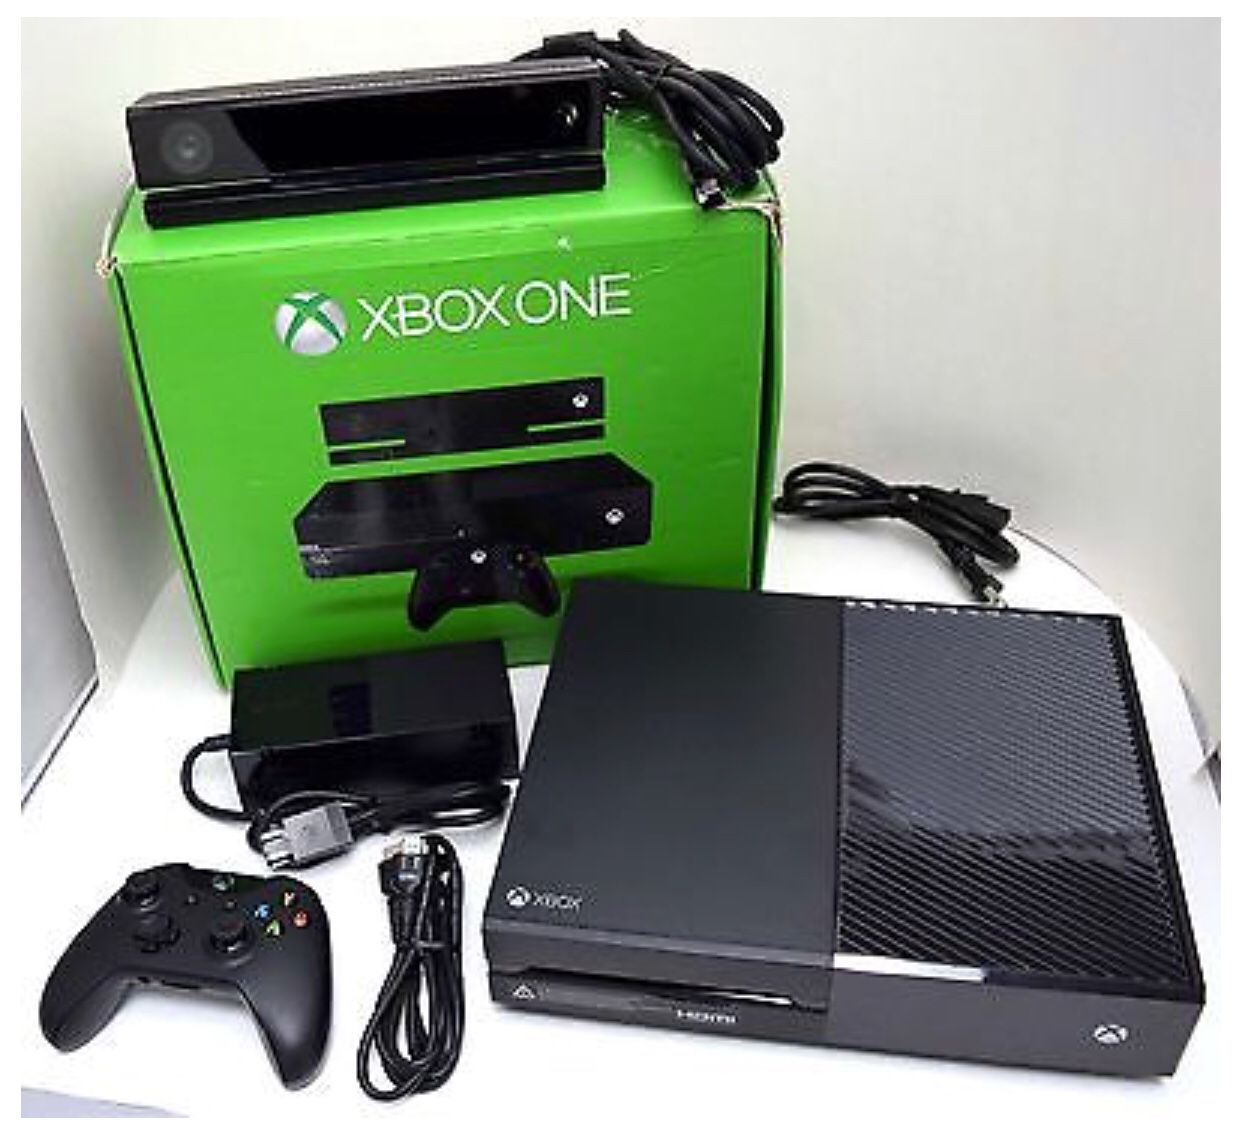 Xbox one with Kinect